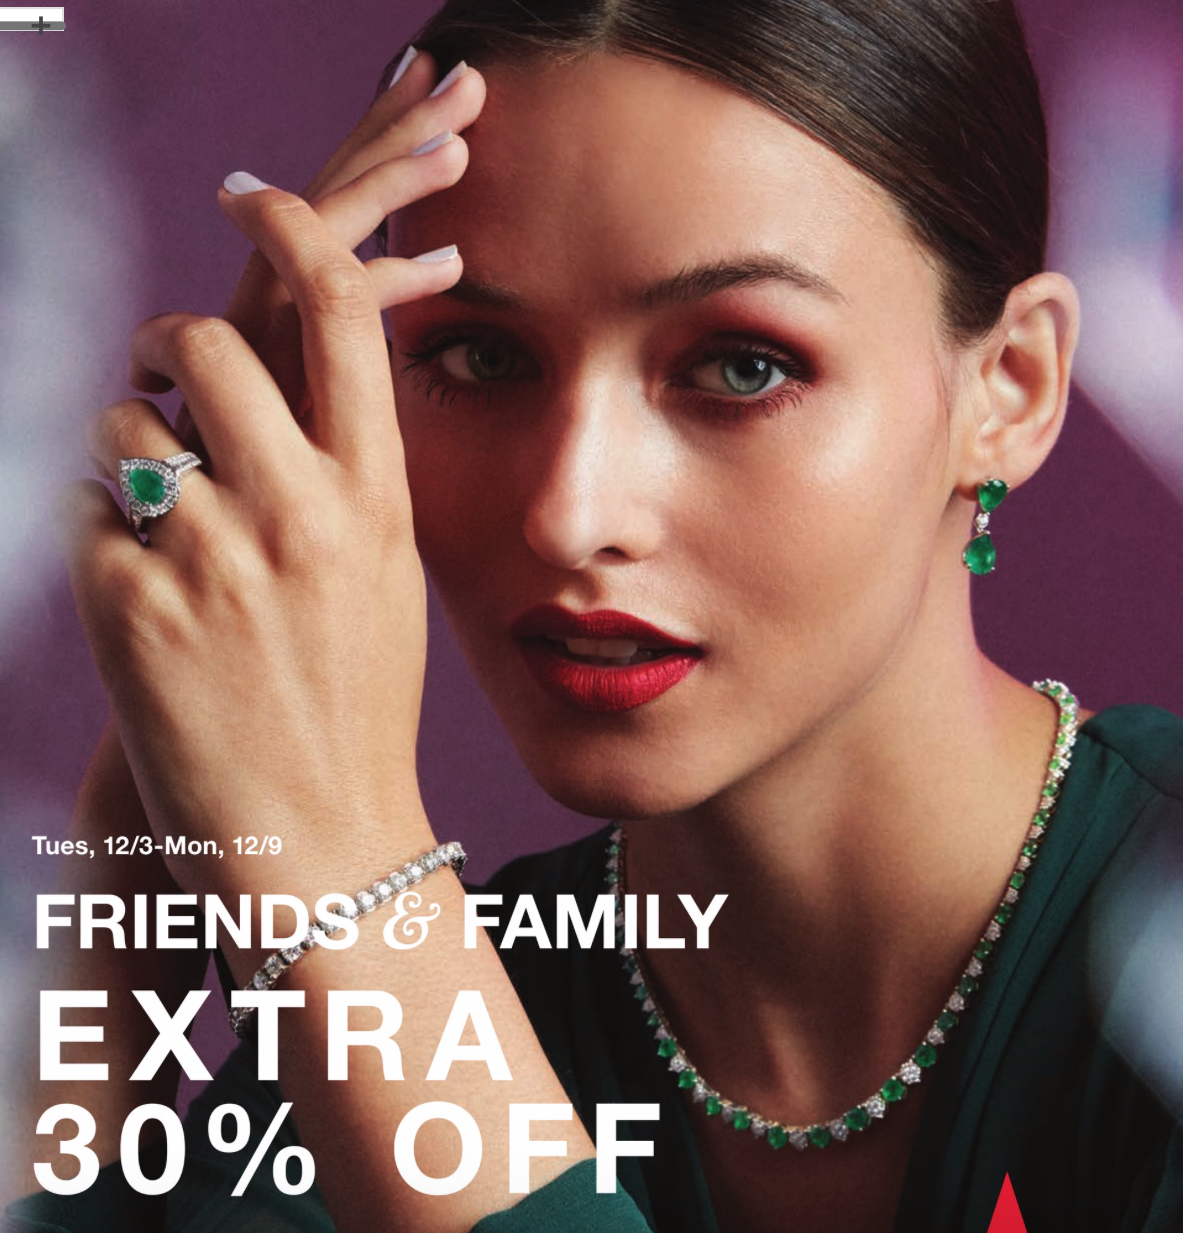 THE SAVVY SHOPPER: Emerald Jewelry Gifts At Macy's